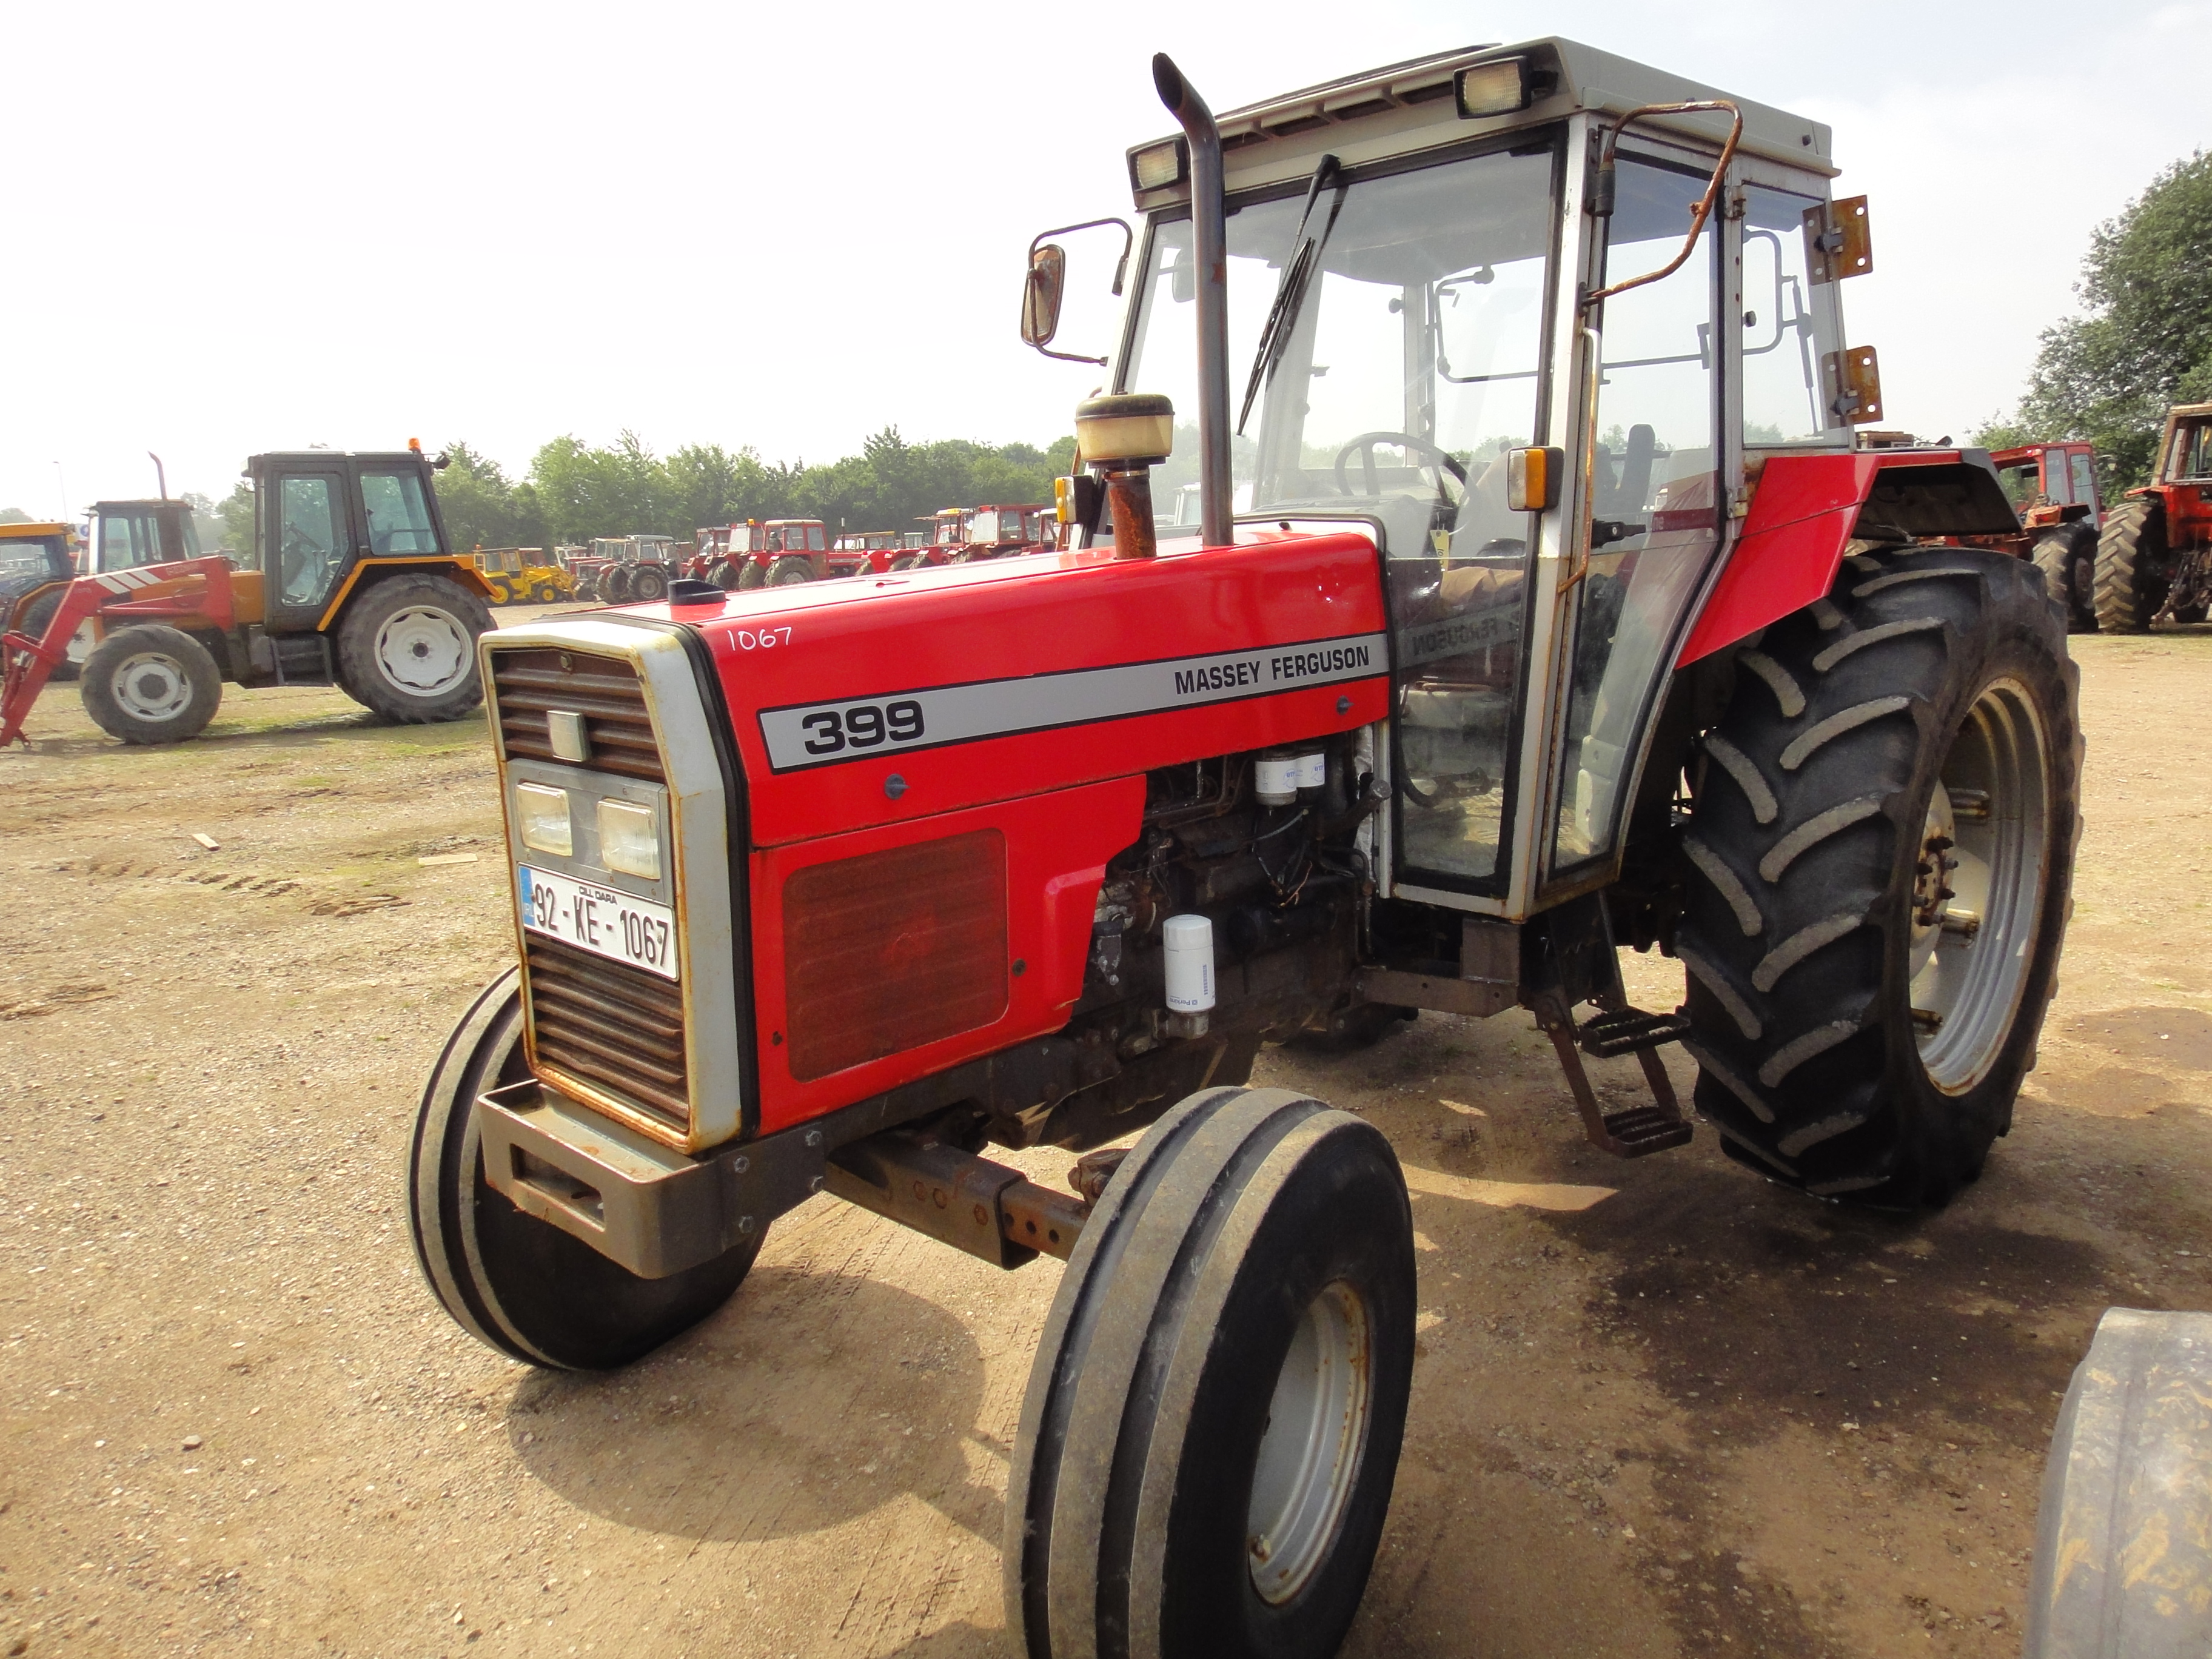 Massey ferguson 399 - Google Search | Tractors made in Great Britain ...